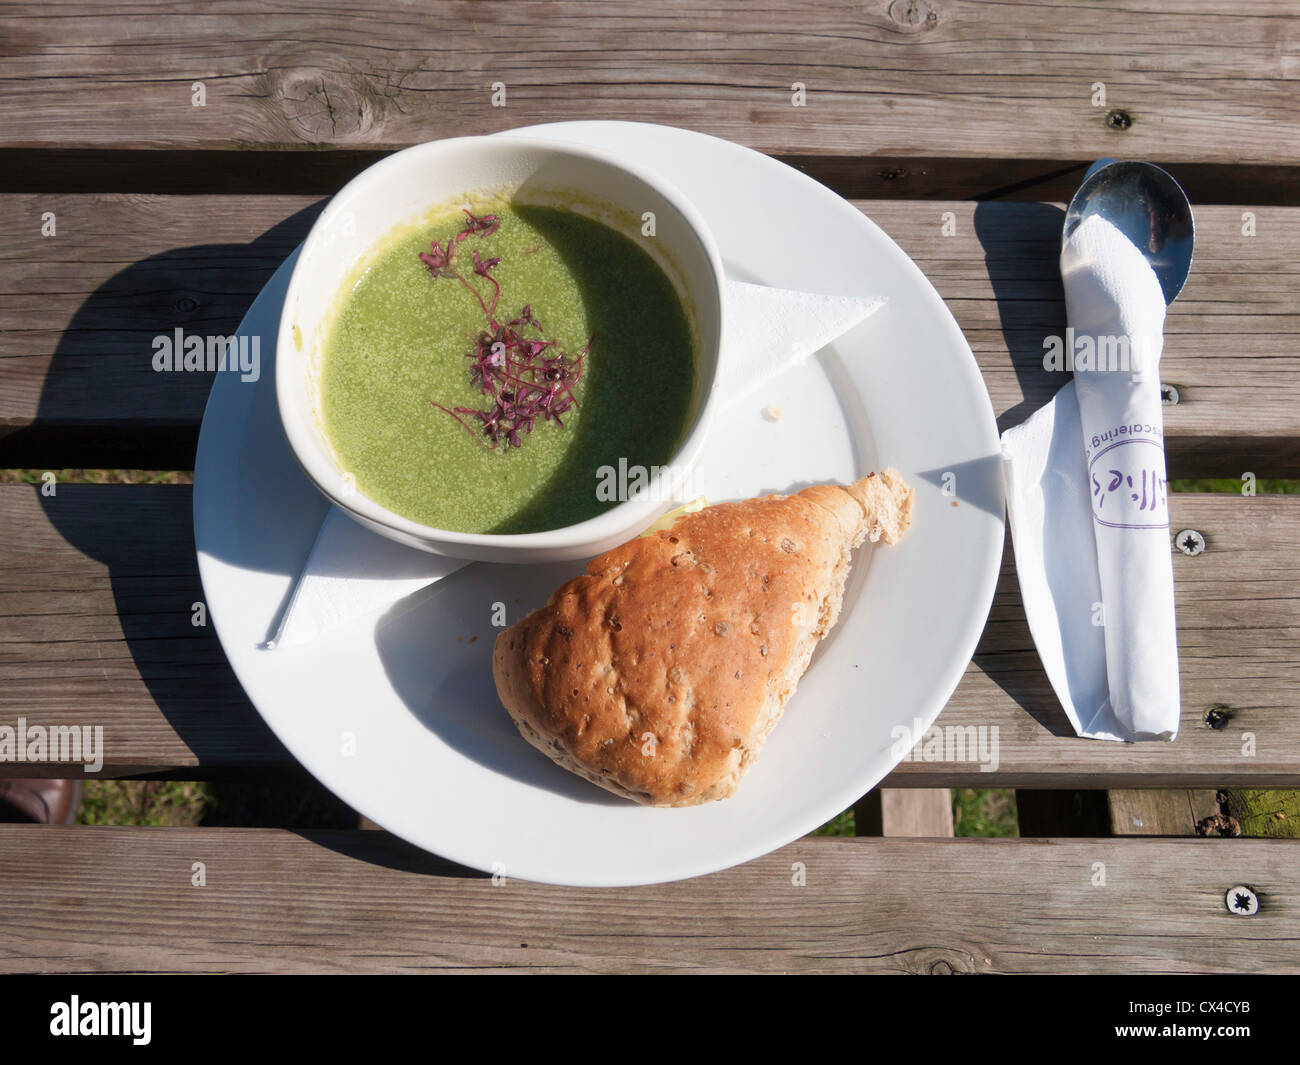 A slimmers lunch of broccoli soup and a piece of bread at an outdoor café table Stock Photo